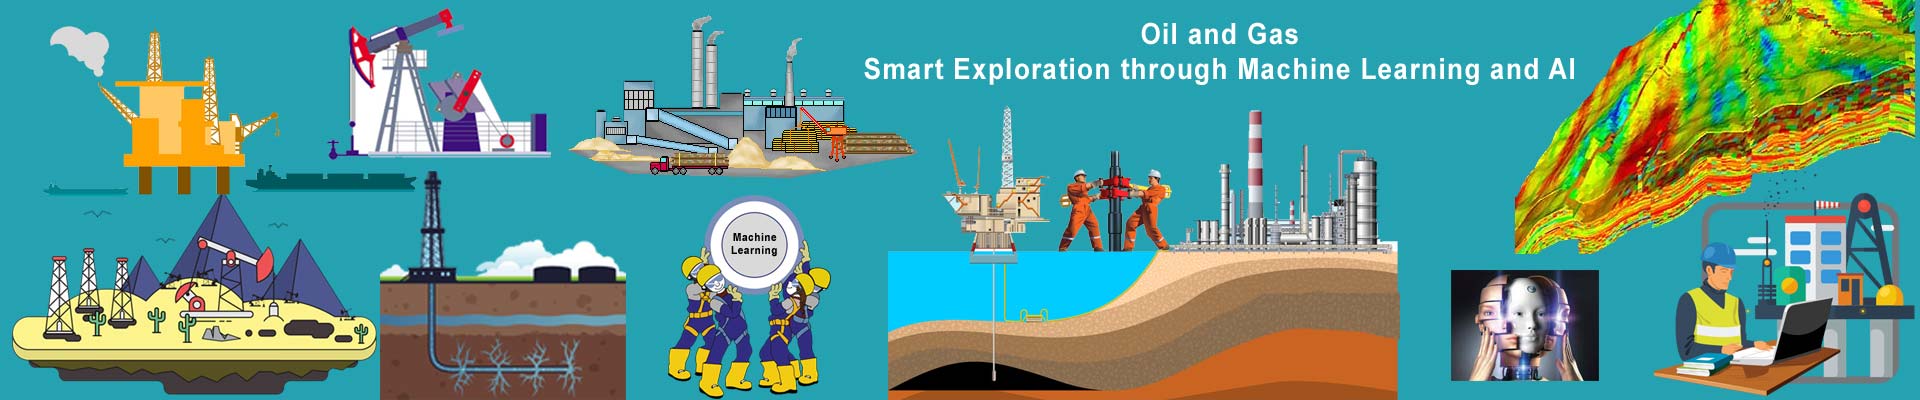 Oil and Gas–Smart Exploration through Machine Learning and AI